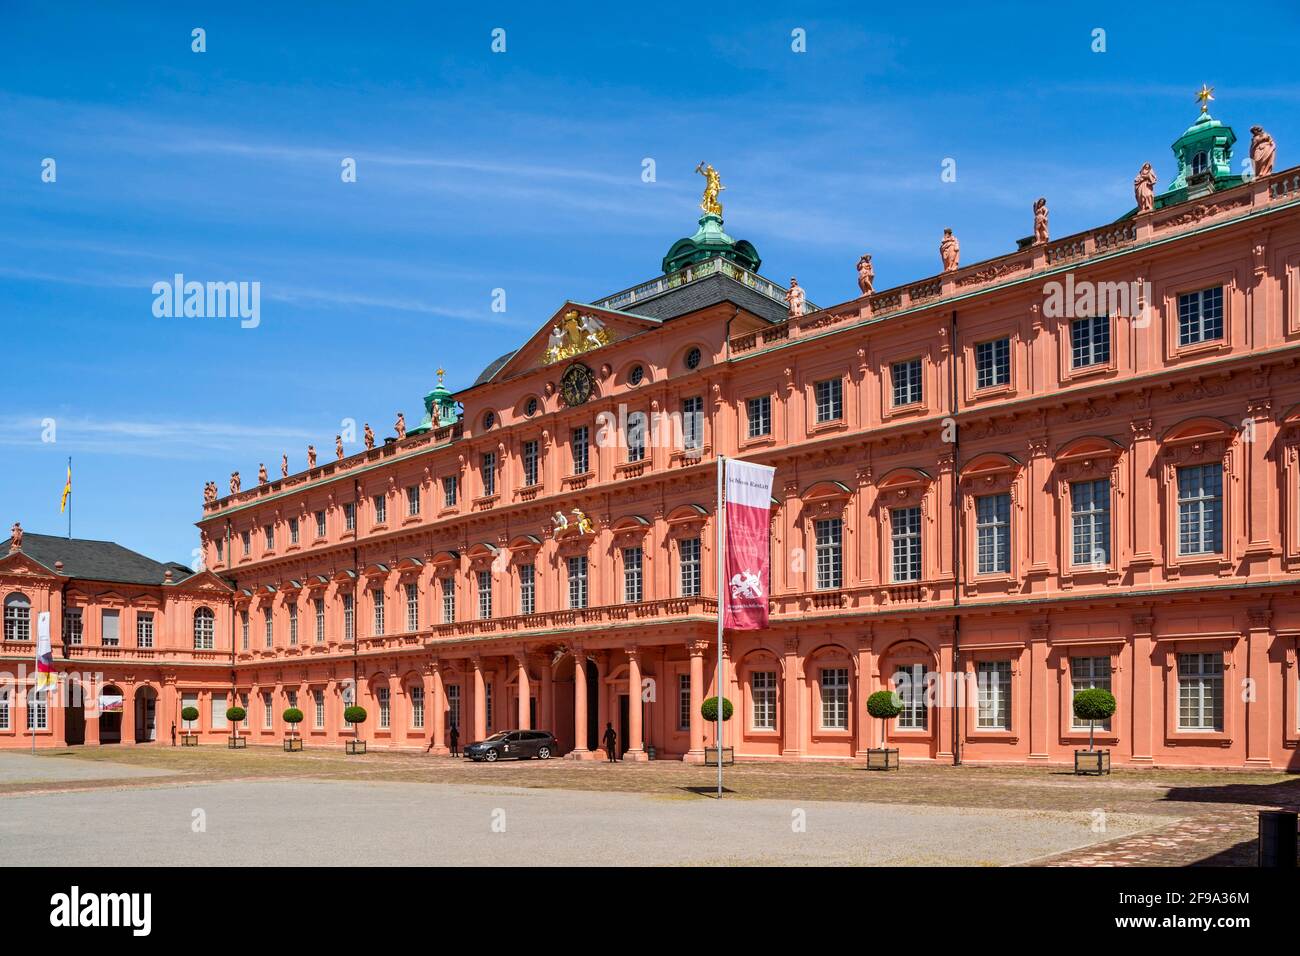 Germany, Baden-Wuerttemberg, Rastatt, residential palace, central building with Jupiter statue. The lap was built under Margrave Ludwig Wilhelm von Baden-Baden. Stock Photo